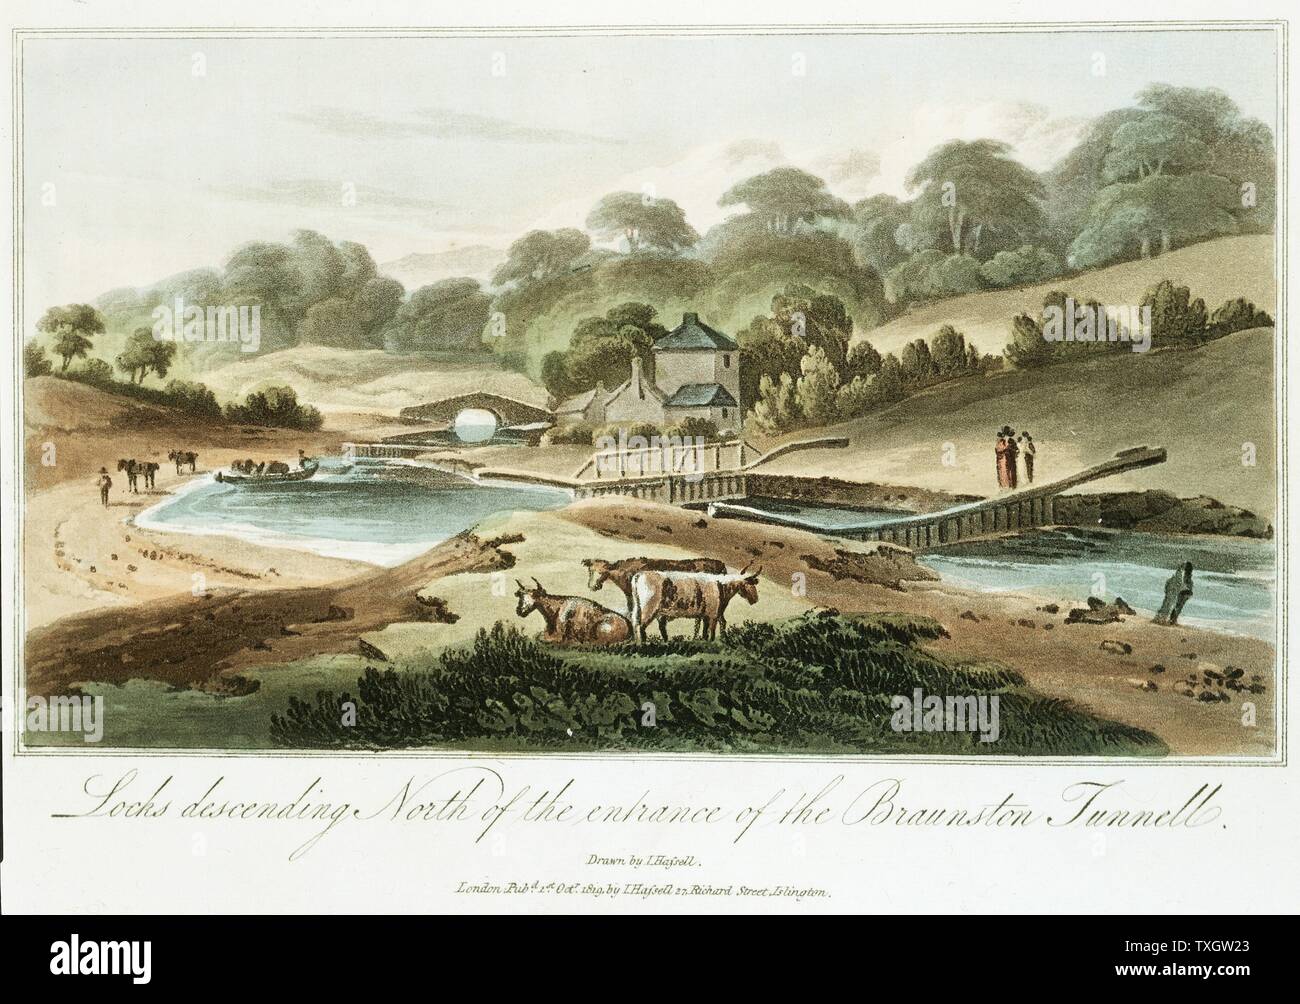 Grand Junction Canal. Pound locks descending to north entrance of the Braunston tunnel, Northampstonshire. Chief engineer, William Jessop: Resident engineer, James Barnes. Part of network linking London with Midlands manufacturing towns, and with Liverpool 1819. From J Hassel 'Tour of the Grand Junction Canal' Aquatint London Stock Photo